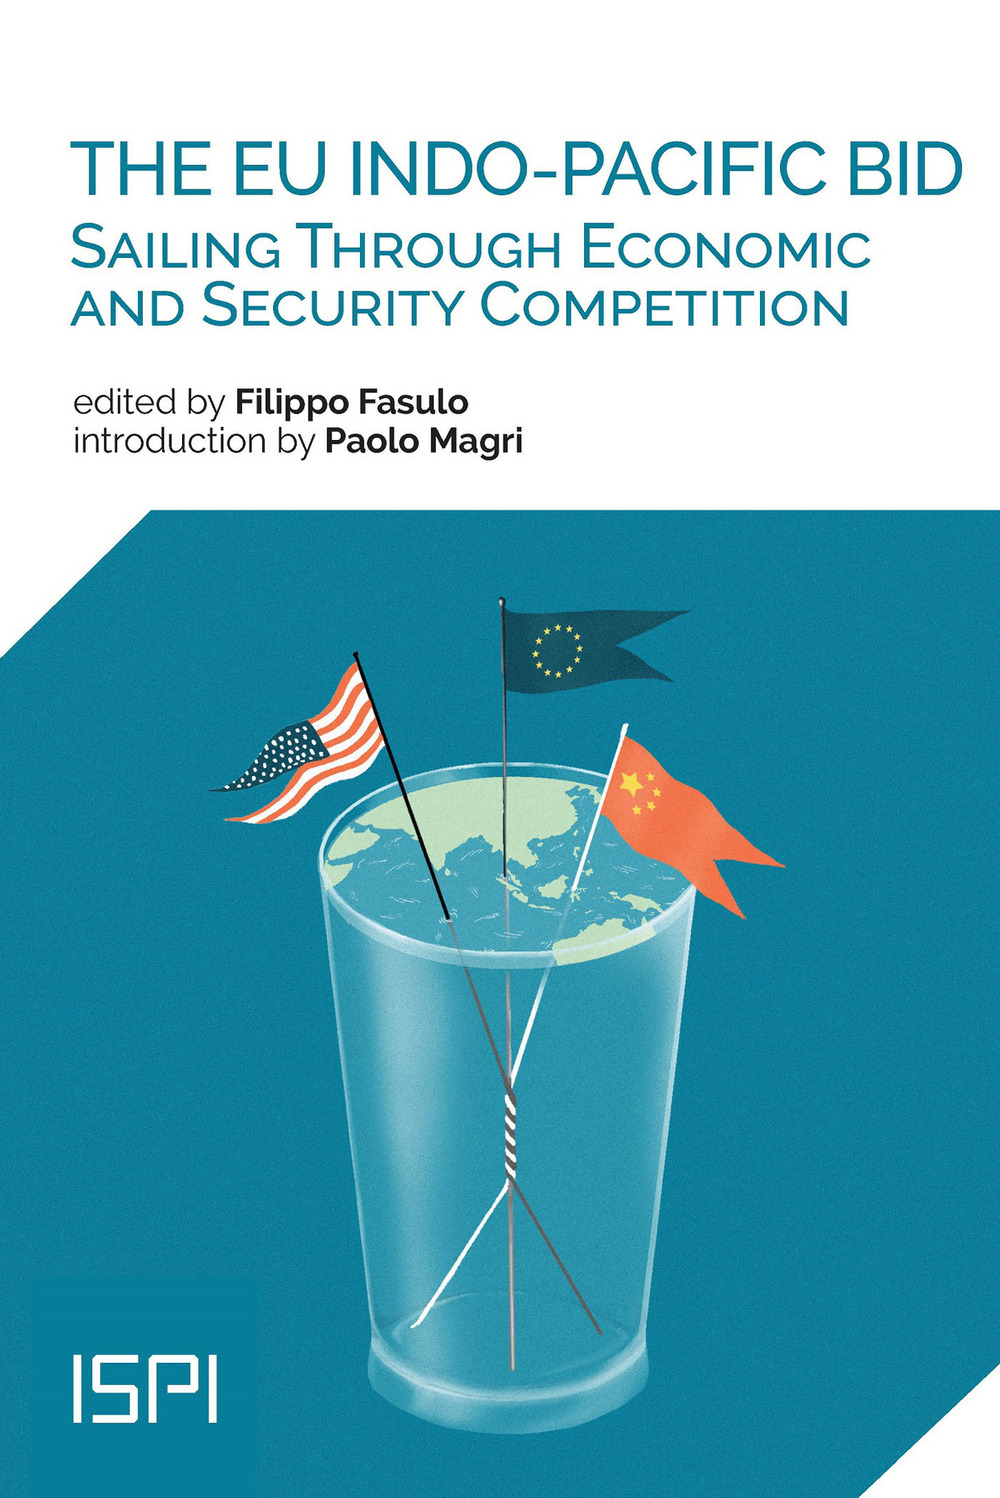 The EU Indo-Pacific bid. Sailing through economic and security competition